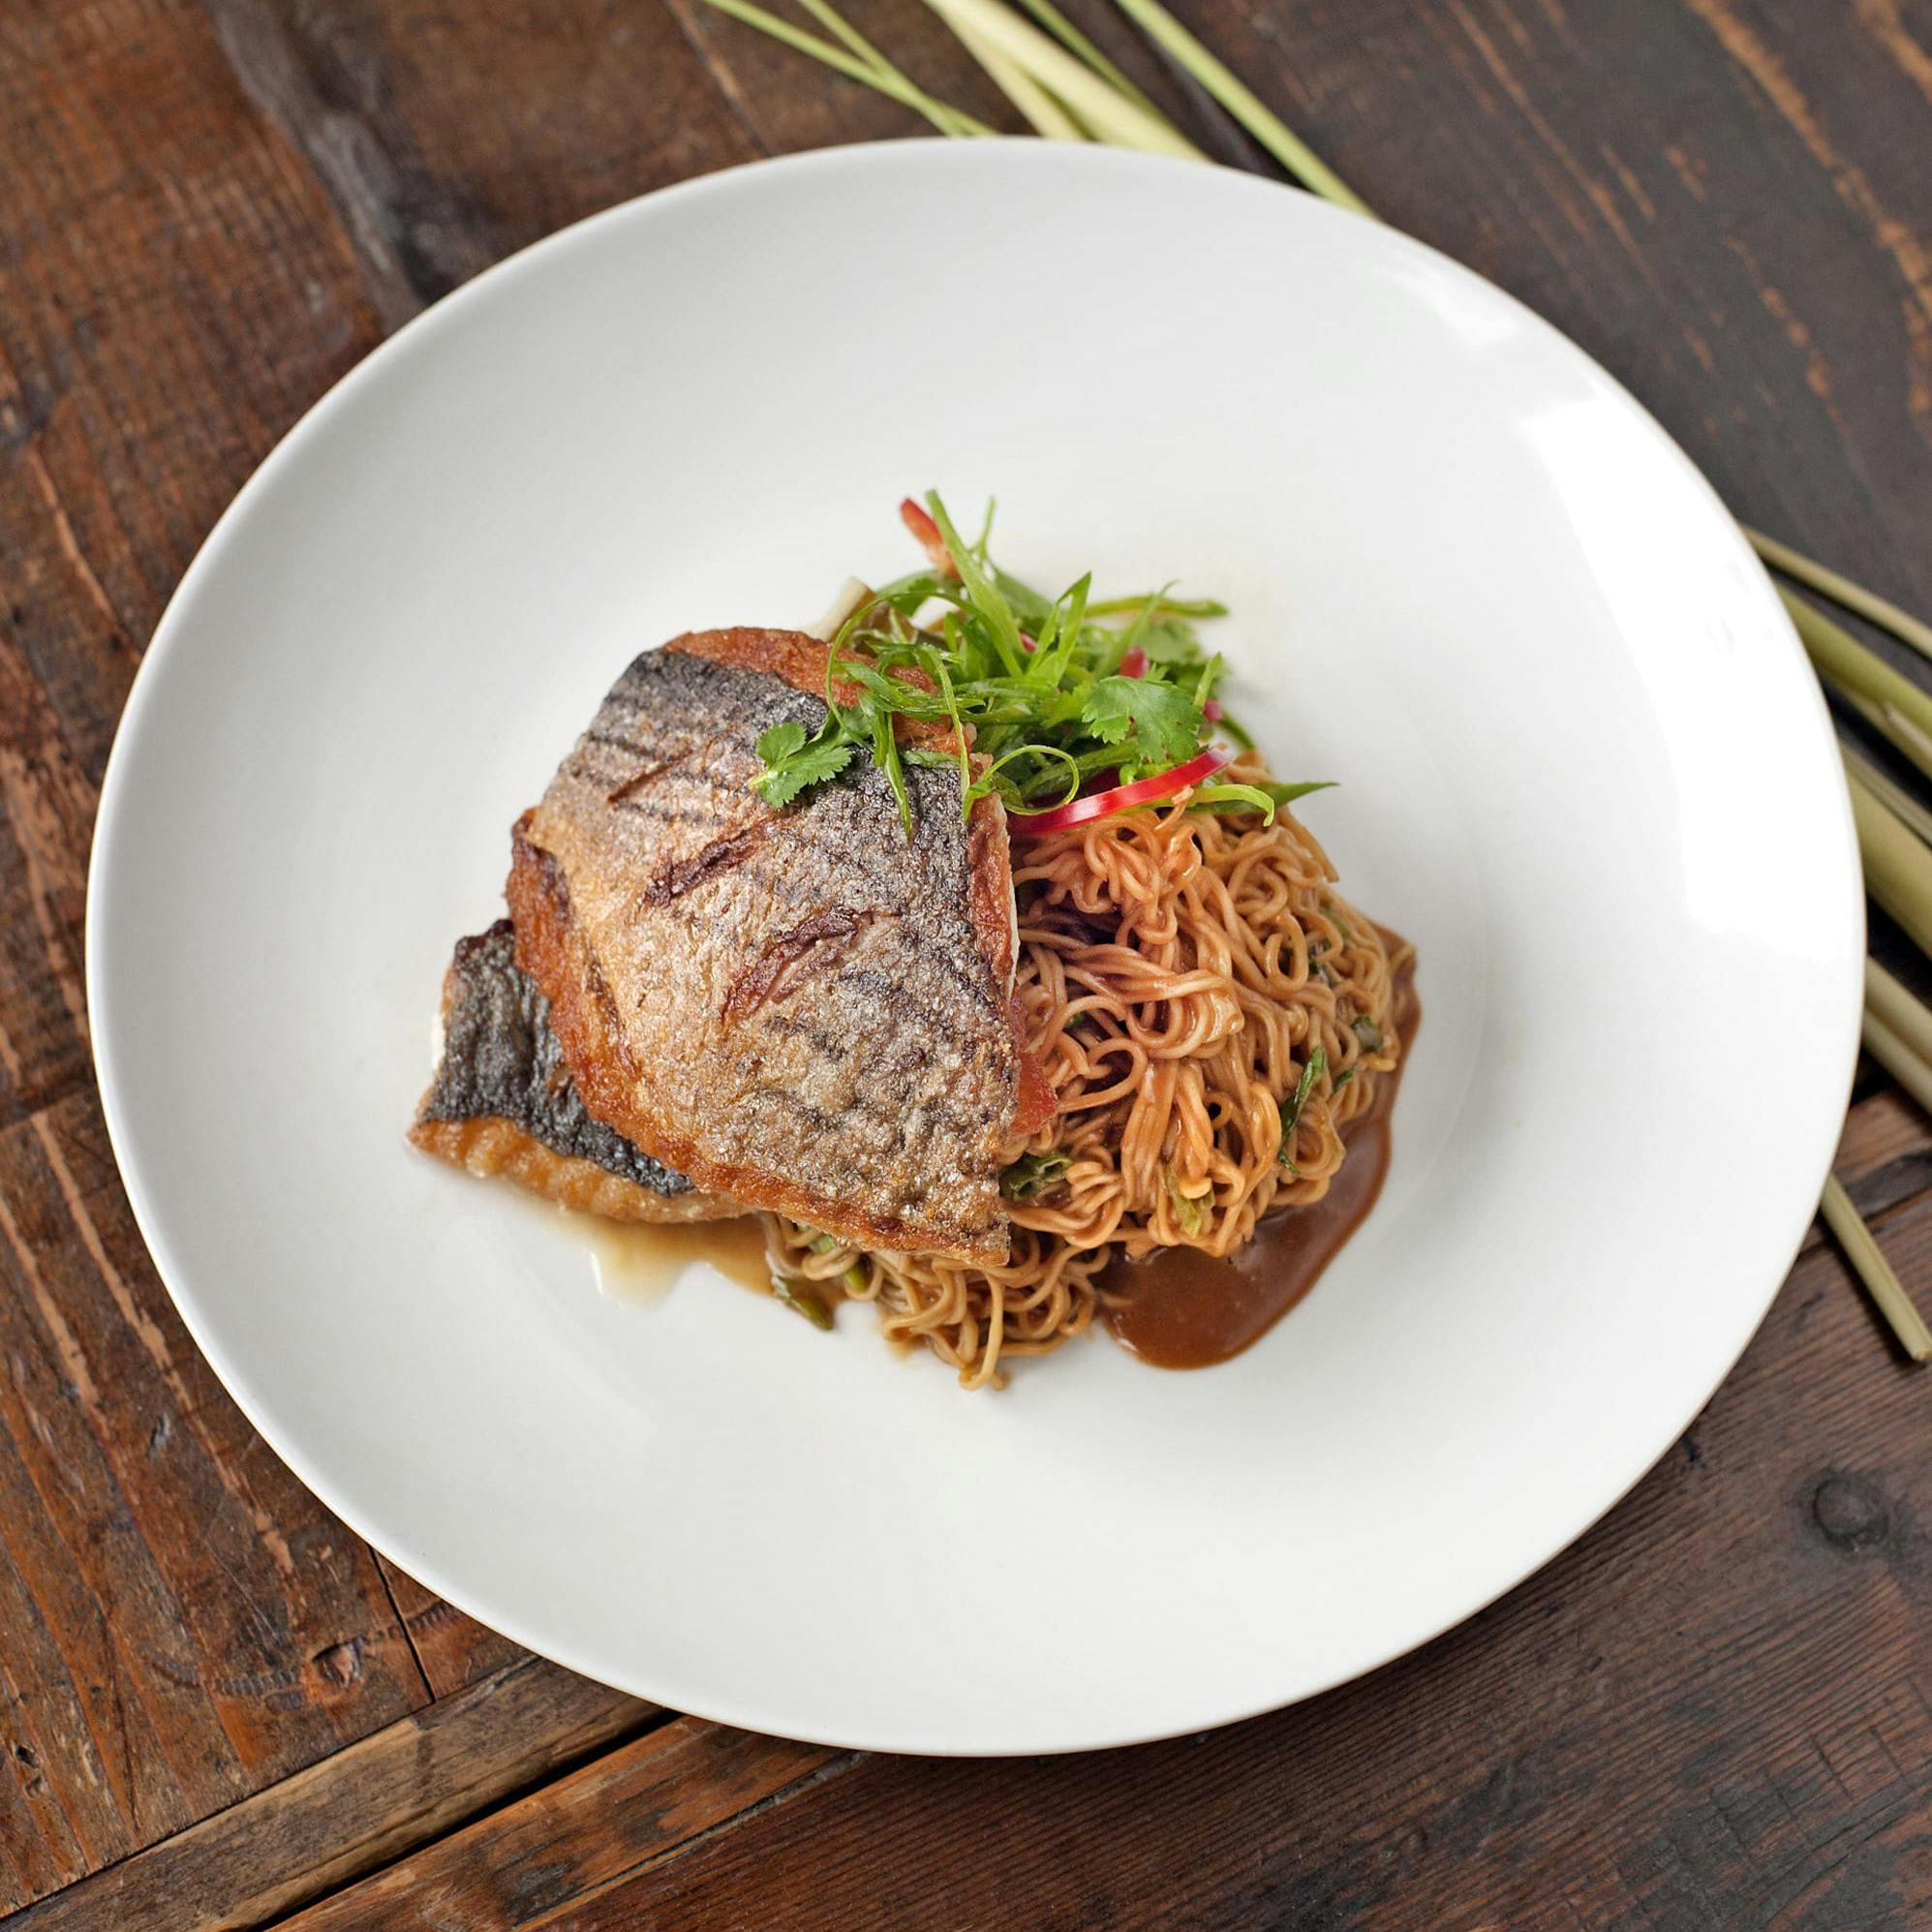 glazed salmon on a bed of noodles